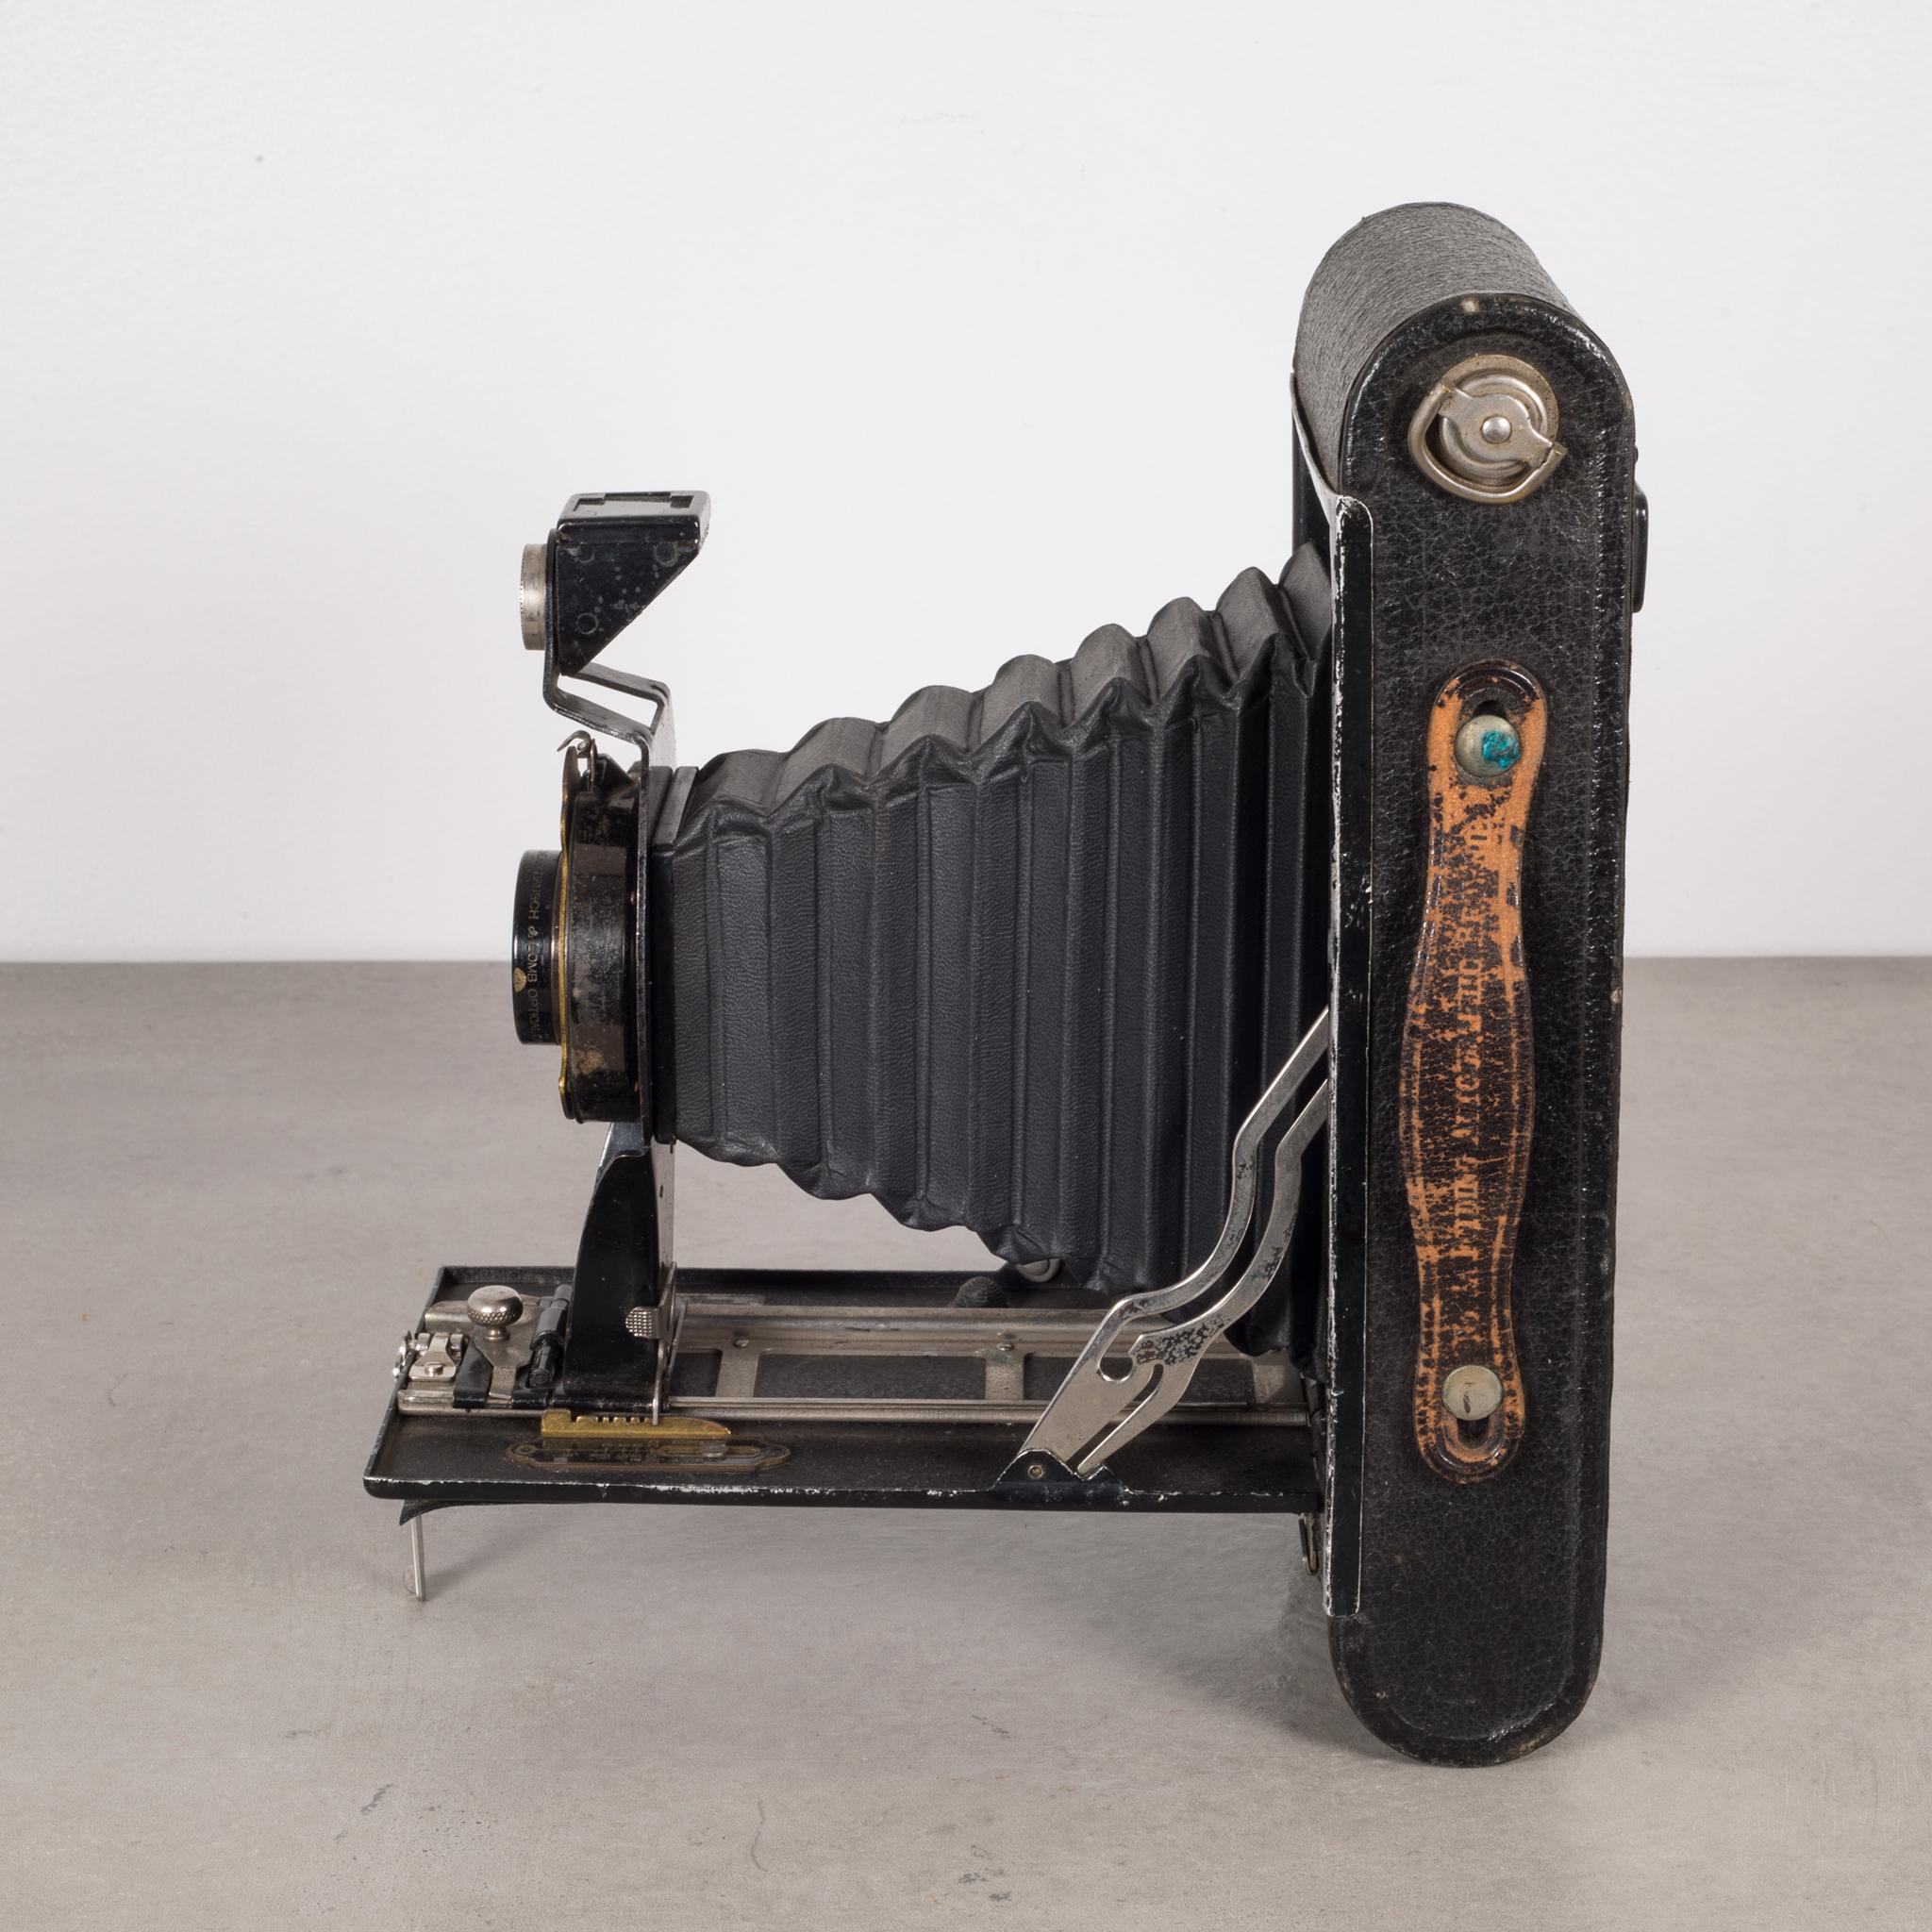 About

This is an original Eastman Kodak No. 3A folding camera. The body is wrapped in leather with chrome and brass accents. The camera features a hand-held shutter push button and folds to 2 inches. This piece has retained its original finish